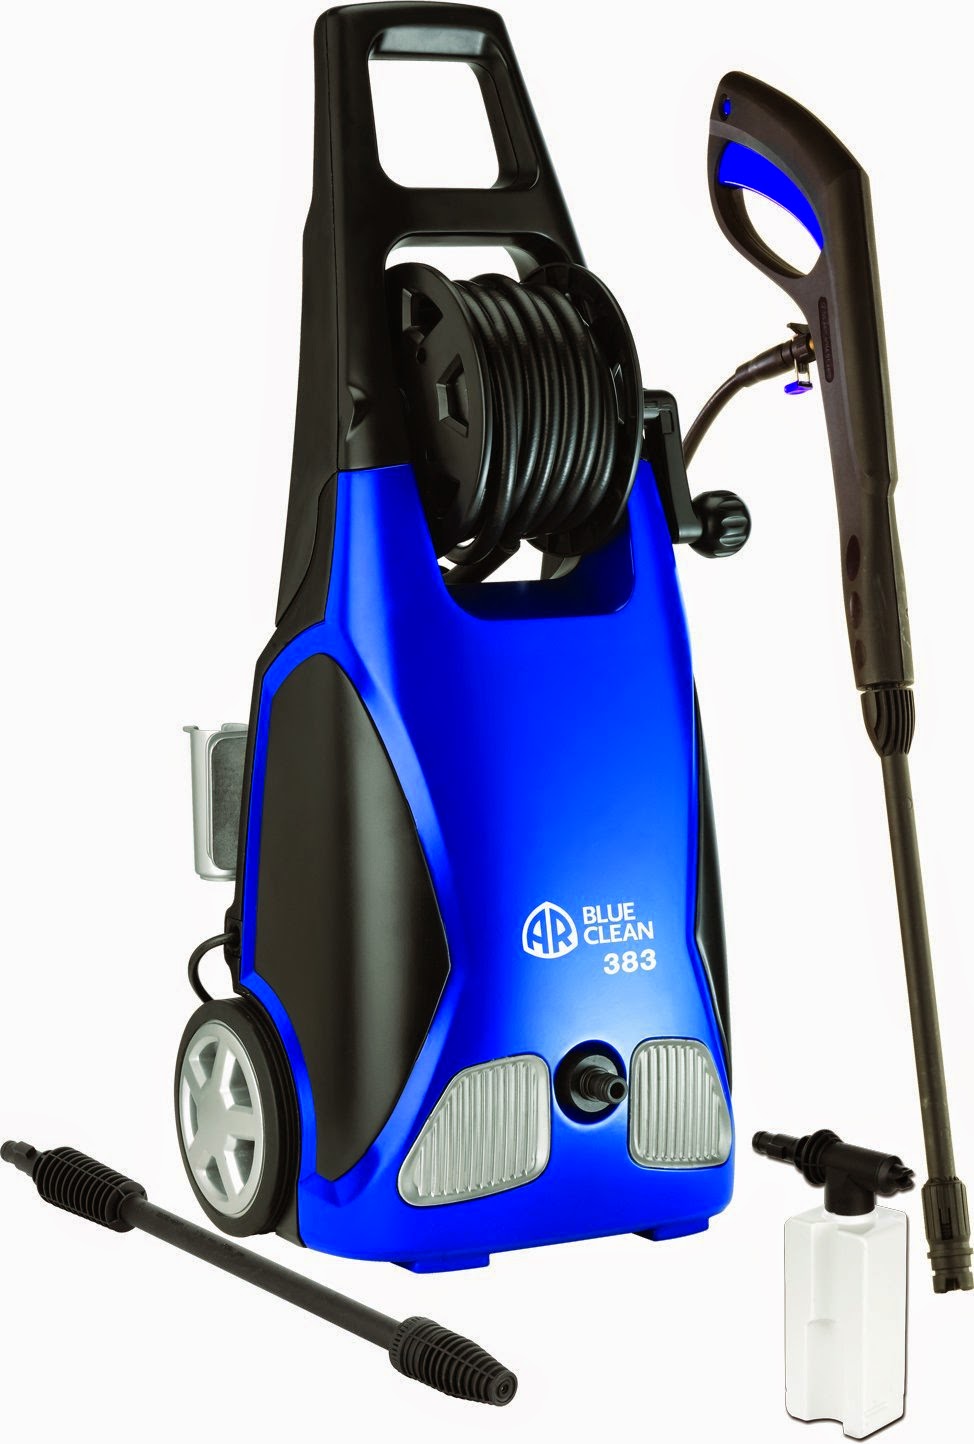 AR Blue Clean AR383 Electric Pressure Washer, 1.5 GPM, 1900 PSI, Total Stop System